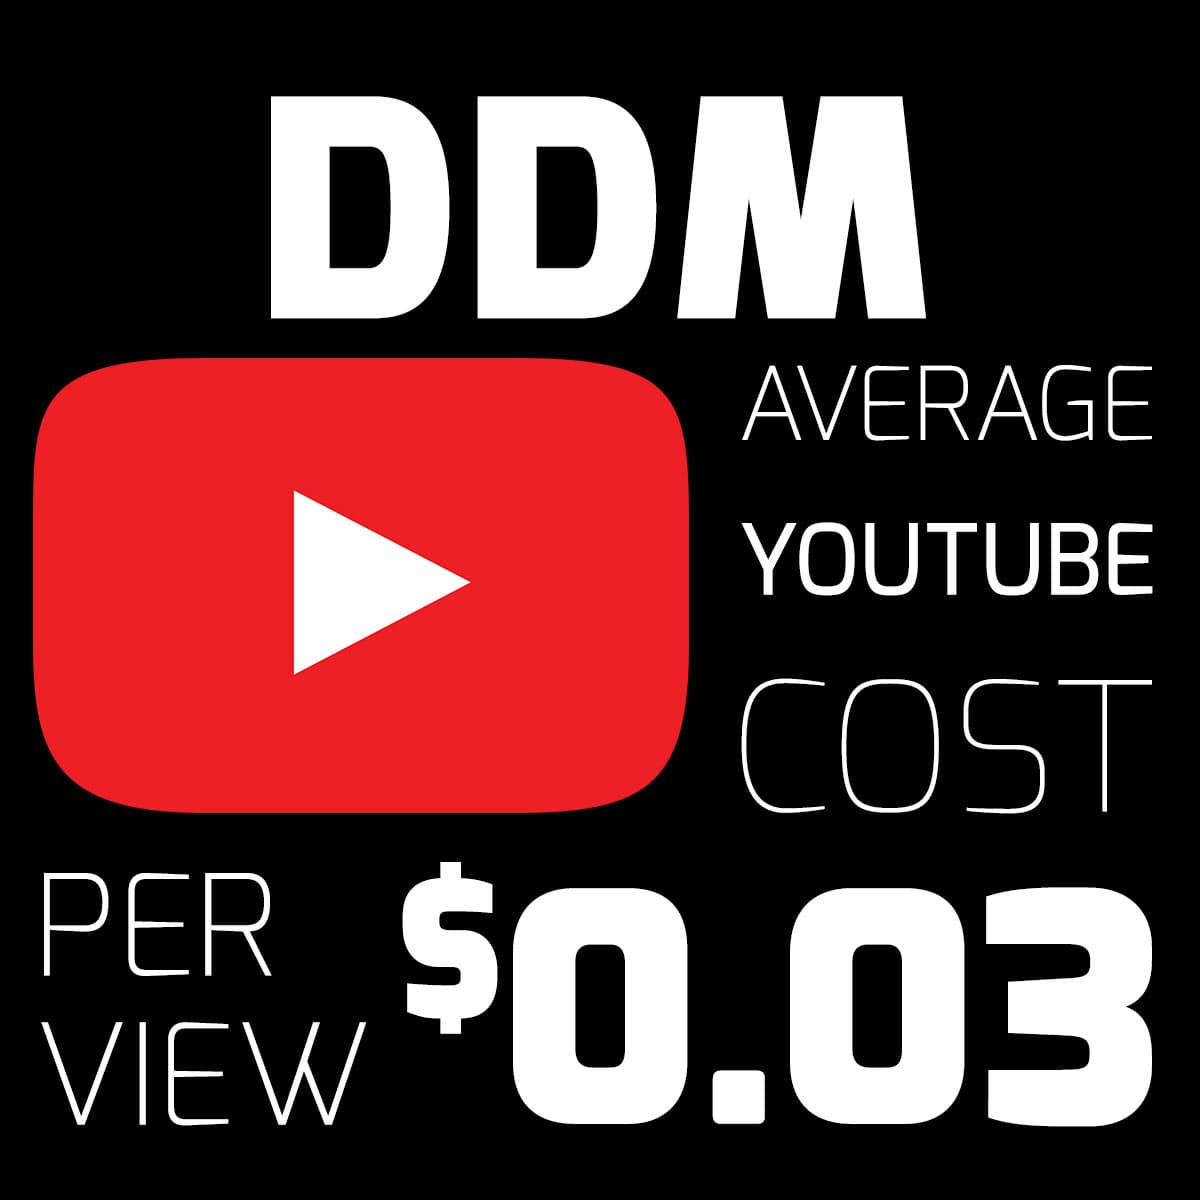 DDM Average YouTube Cost per view: $0.03